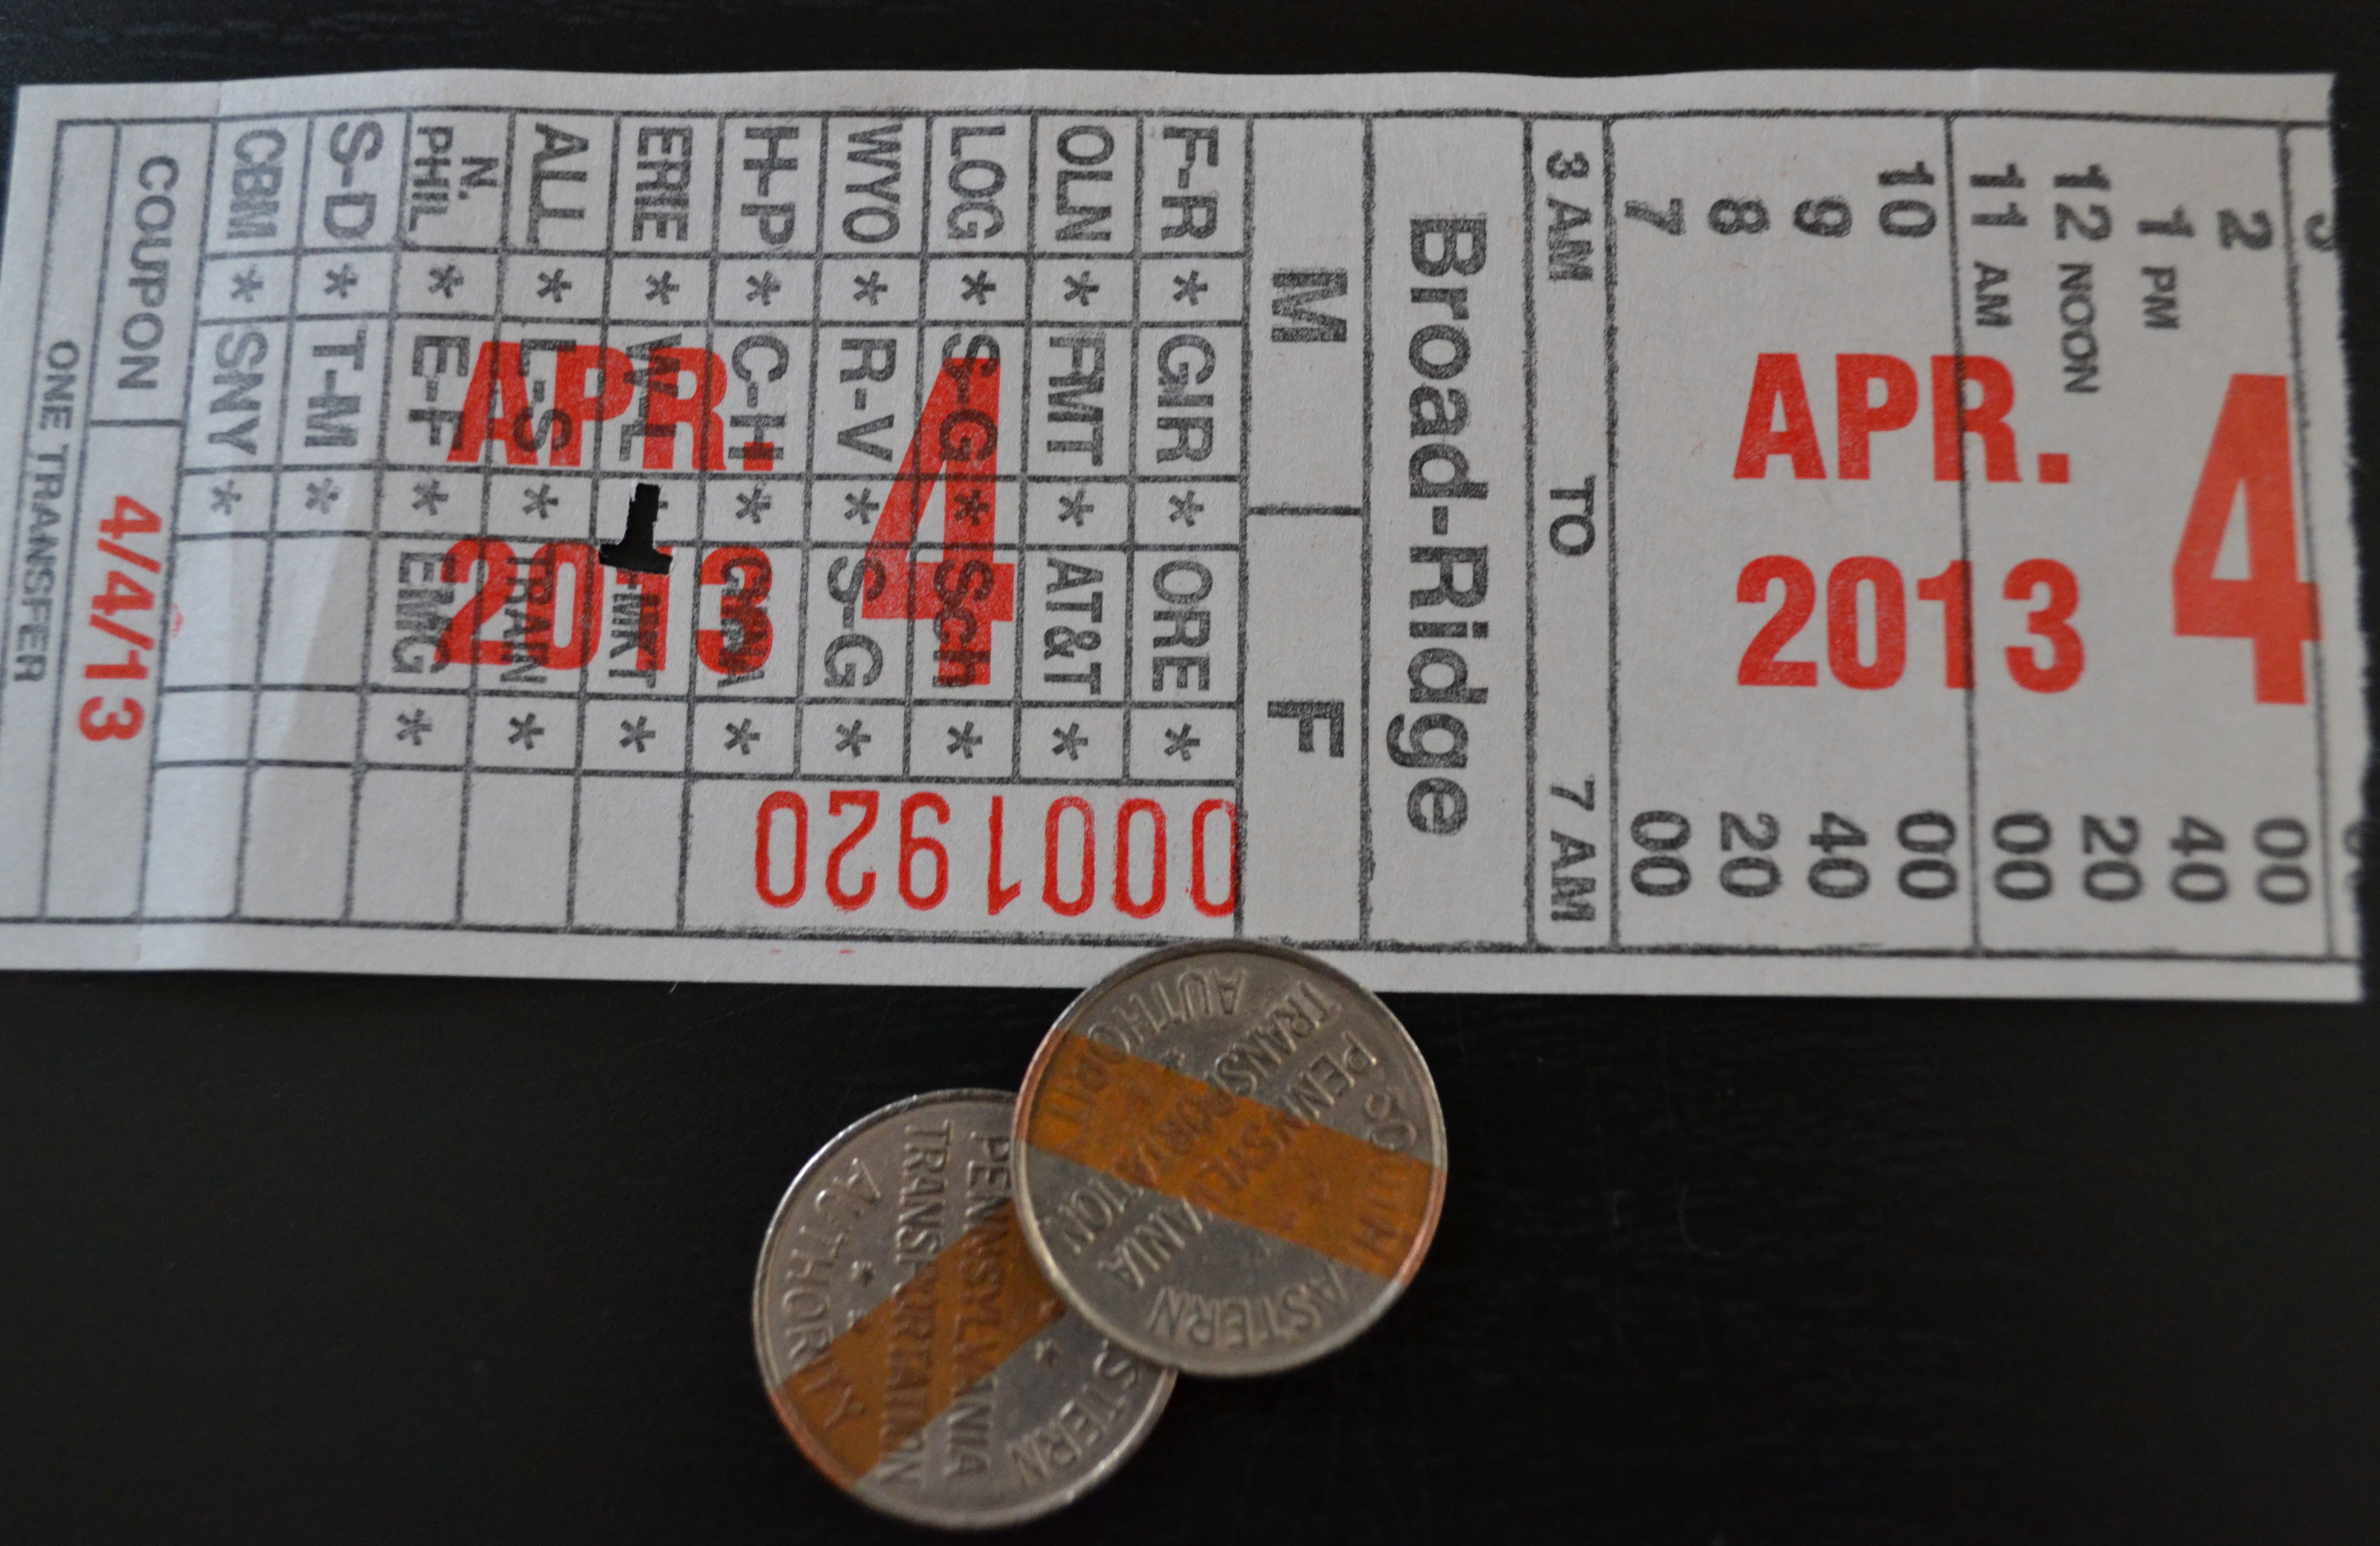 SEPTA is working to phase out tokens and paper transfers by mid 2014